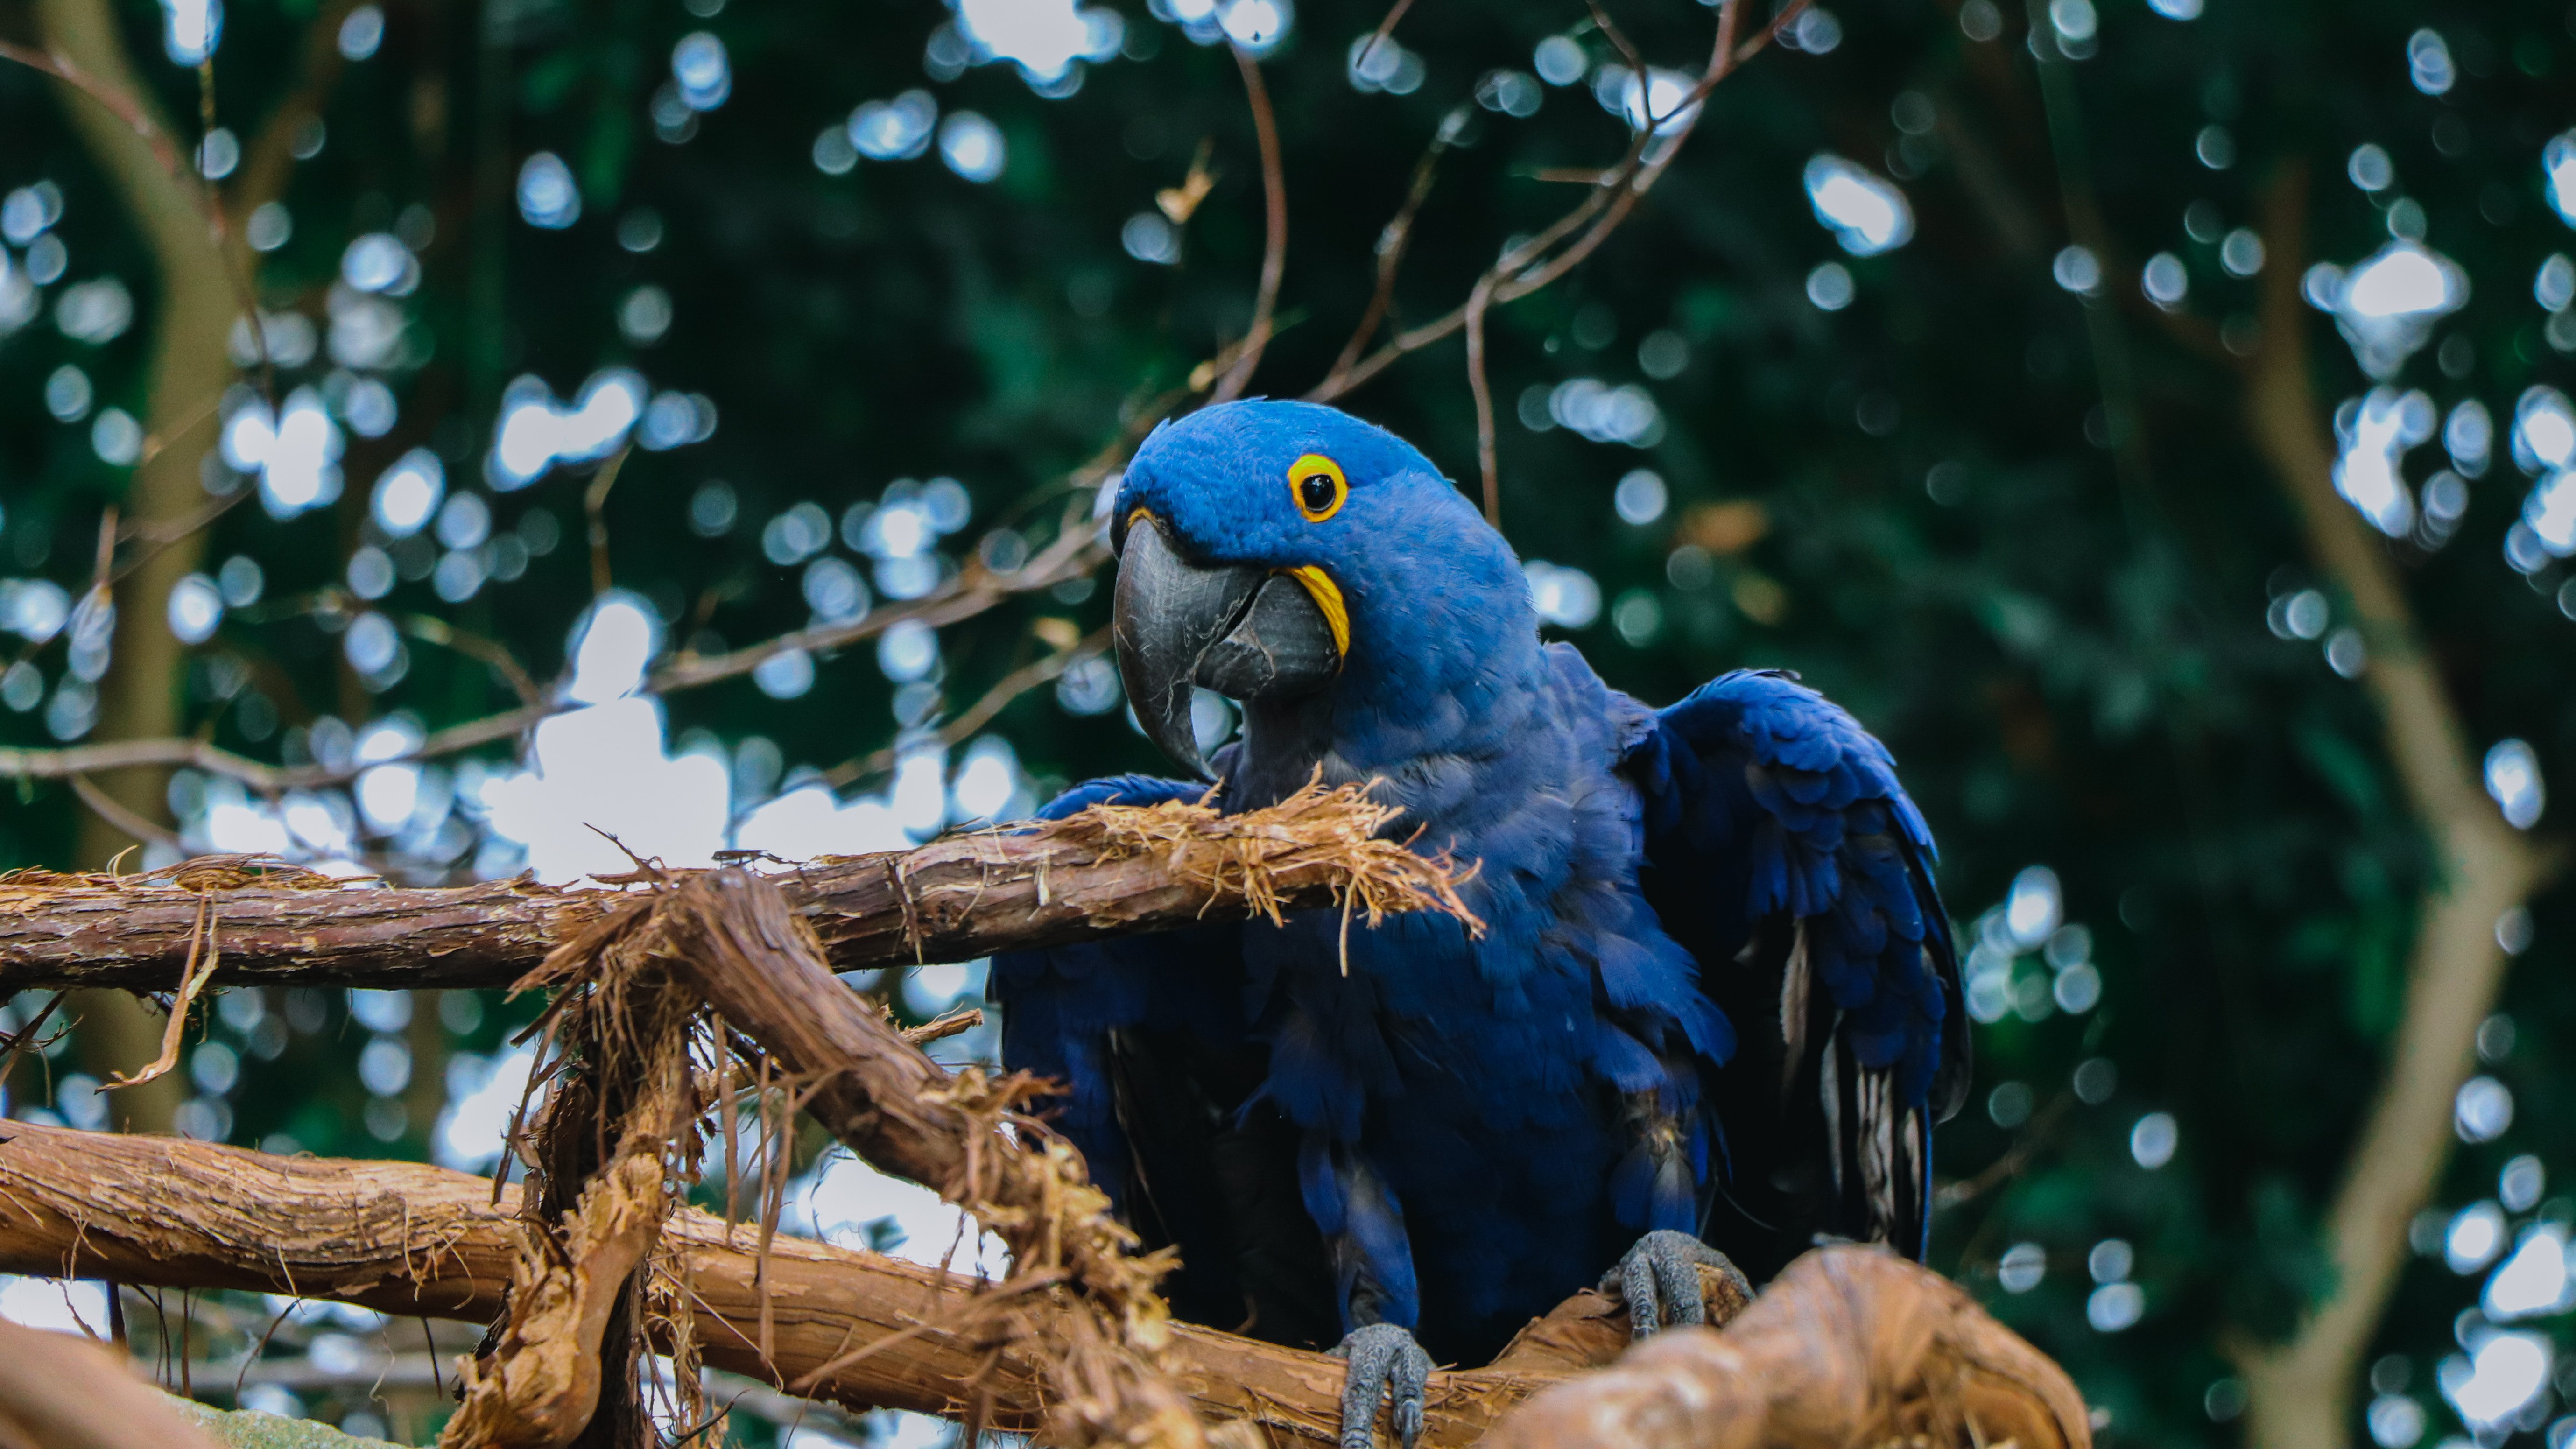 Located in the North Side of Pittsburgh, PA, the National Aviary is America’s only independent indoor nonprofit zoo that is dedicated exclusively to birds.